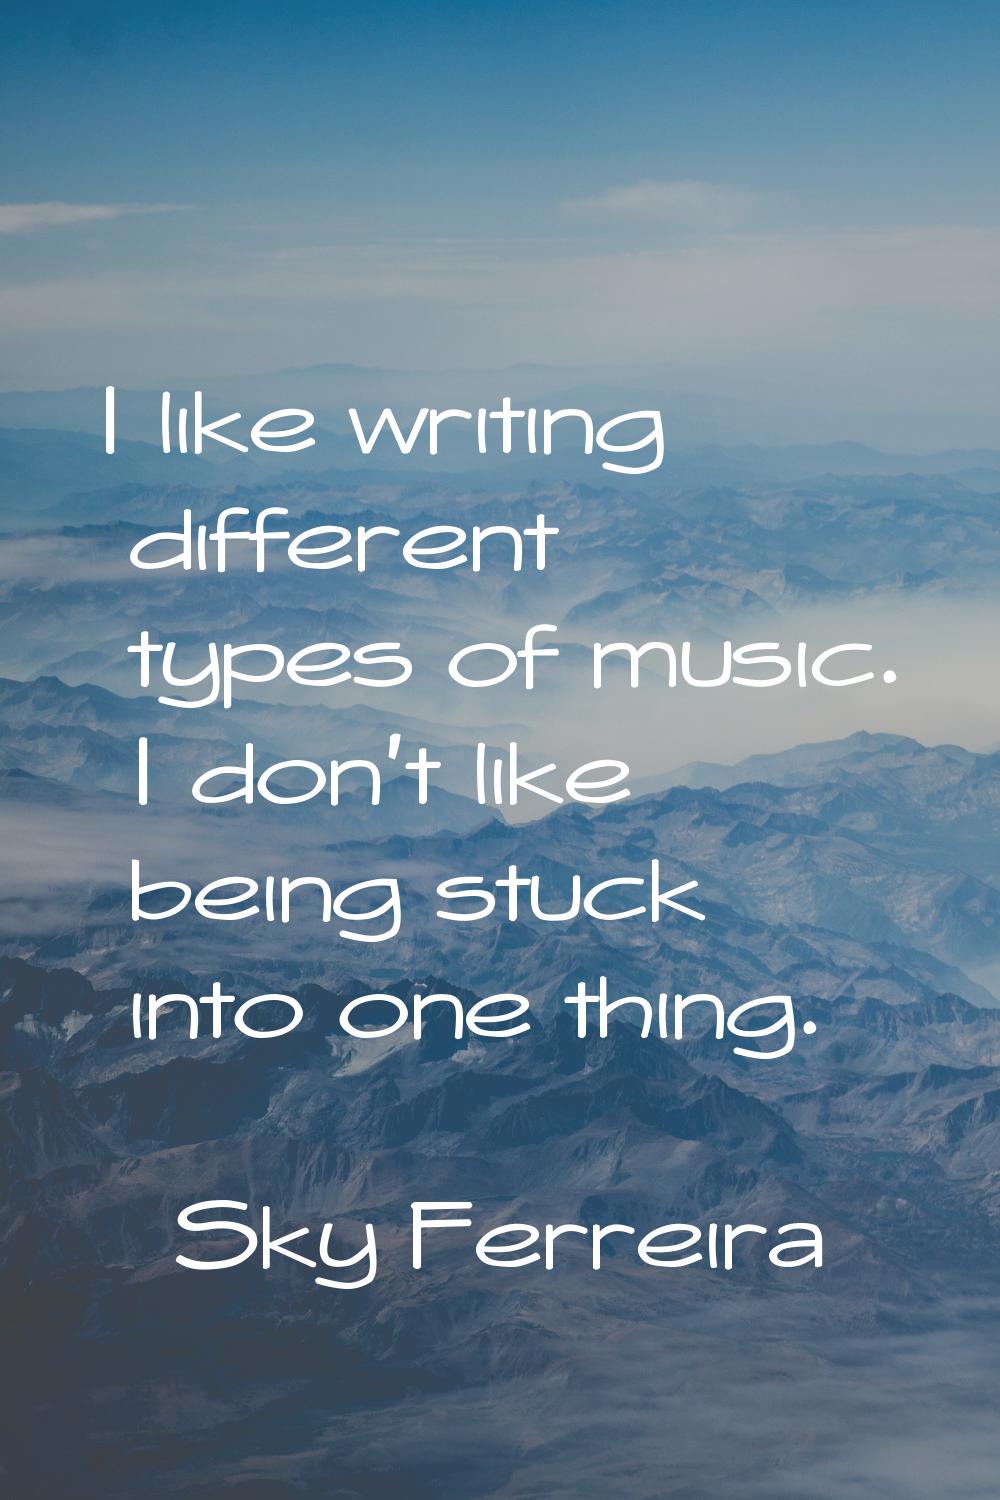 I like writing different types of music. I don't like being stuck into one thing.